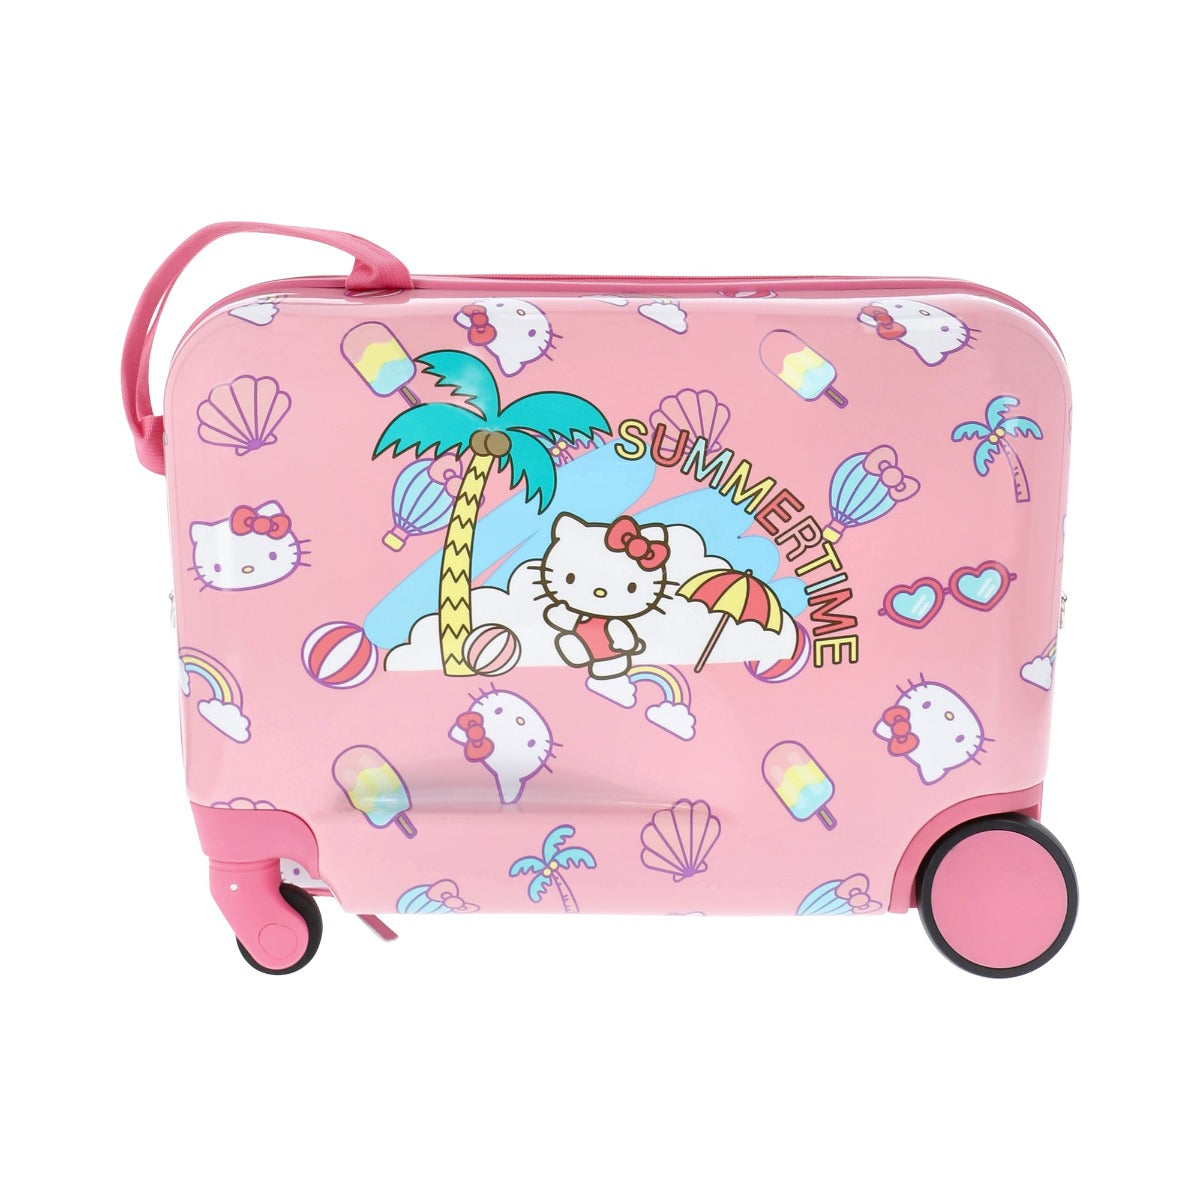 Pink Hello Kitty Summertime Ride-on 14.5" suitcase - kids ride-along carry-on luggage for travel